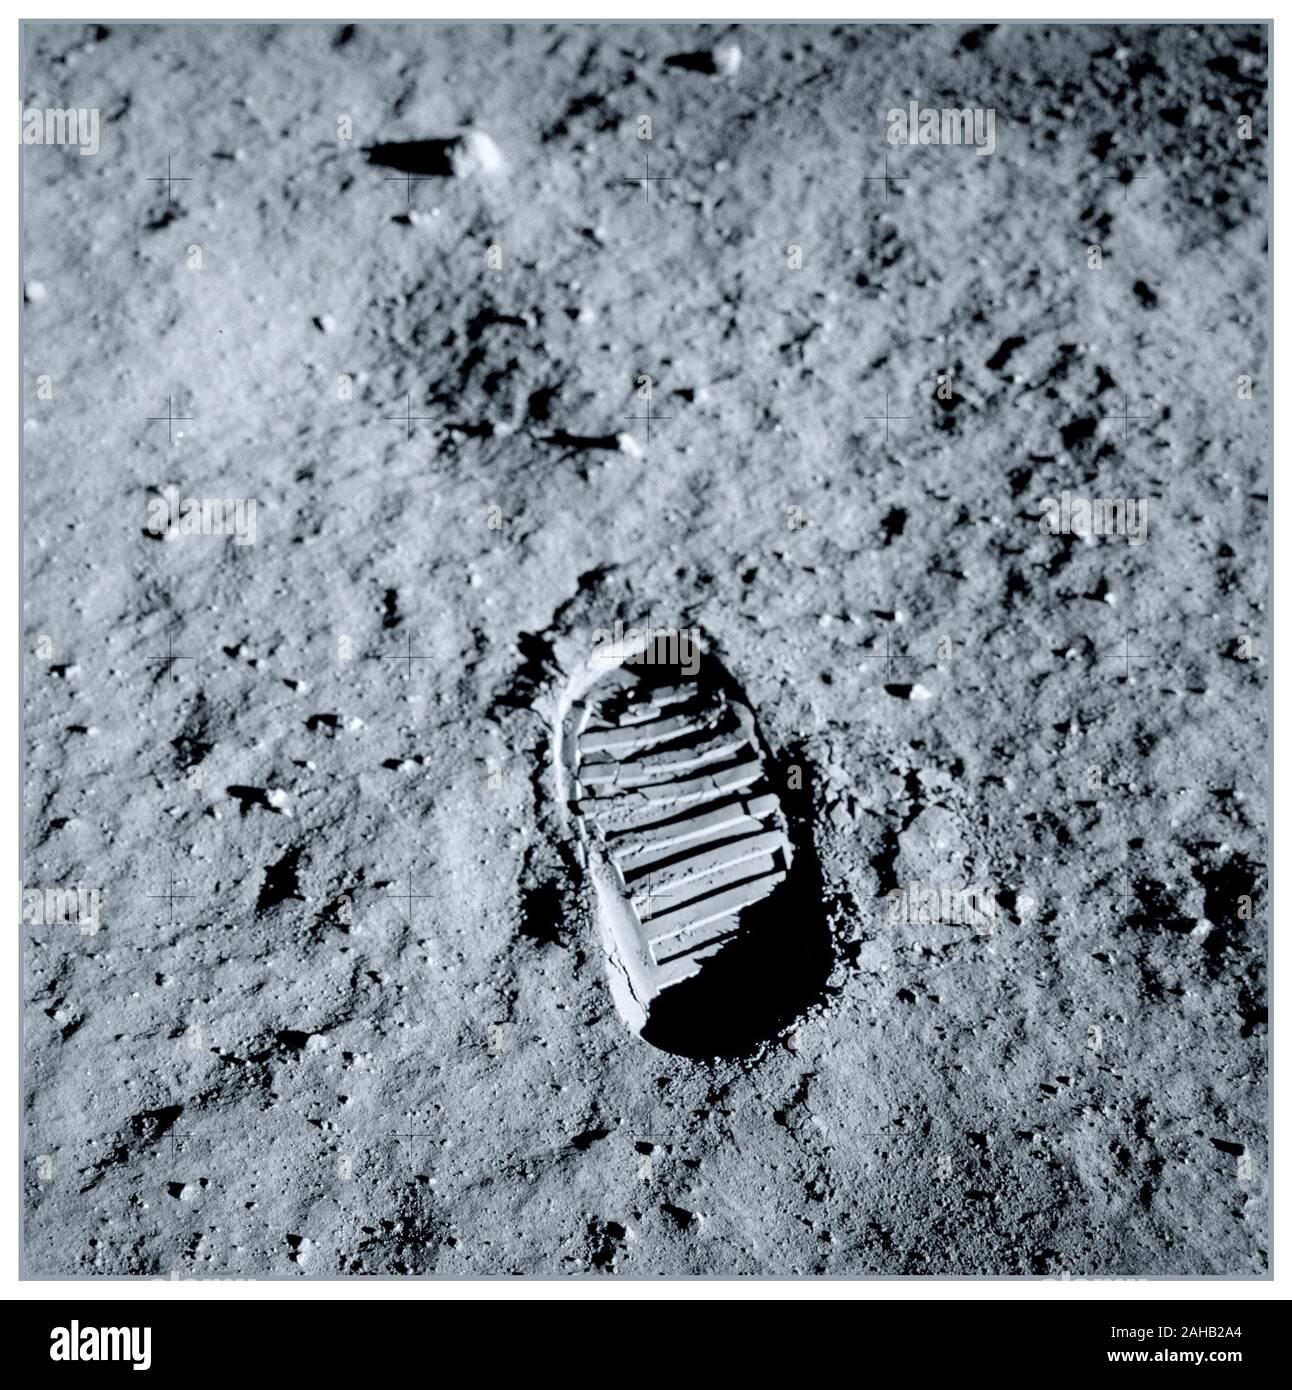 MOON FOOTPRINT 1969 Apollo 11 Lunar Module Pilot Buzz Aldrin's bootprint. Aldrin photographed this bootprint about an hour into their lunar extra-vehicular activity on July 20, 1969, as part of investigations into the soil mechanics of the lunar surface. This photo would later become synonymous with humankind's venture into space. One small step for man, one giant leap for mankind. Stock Photo